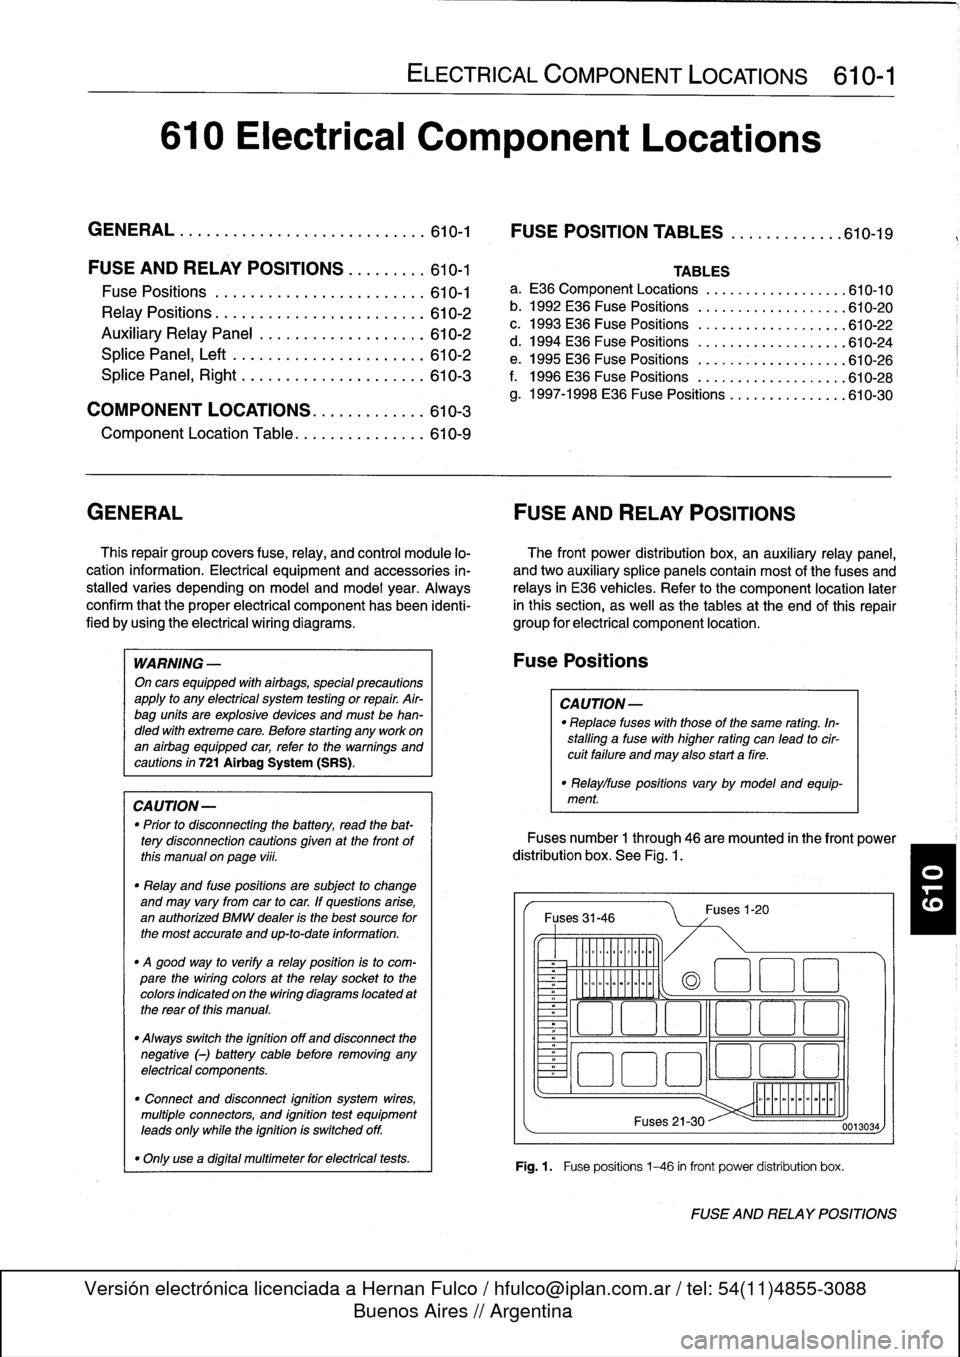 BMW 328i 1998 E36 Workshop Manual 
610
Electrical
Component
Locations

GENERAL
...........
.
.
.
.
.
.
.
.
.
........
610-1

	

FOSE
POSITION
TABLES
..
.
.
.
.
.
.....
.
610-19

FUSE
AND
RELAY
POSITIONS
.
...
.
.
.
.
.
610-1

Fuse
Pos